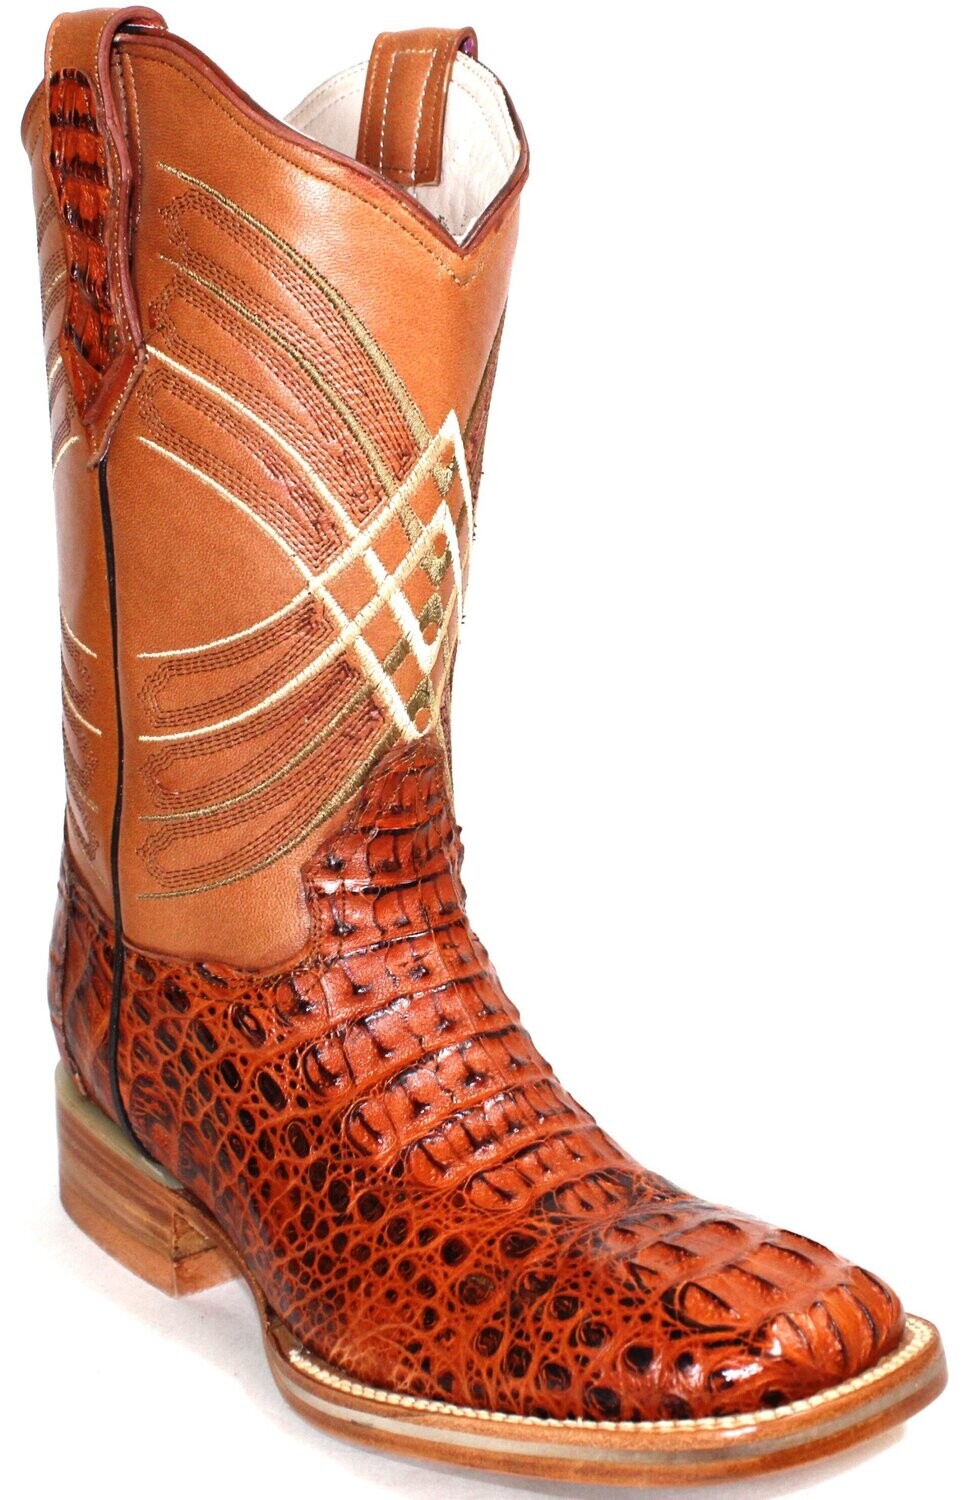 Cayman Horns Exotic Men's Boot - Wide Square Toe